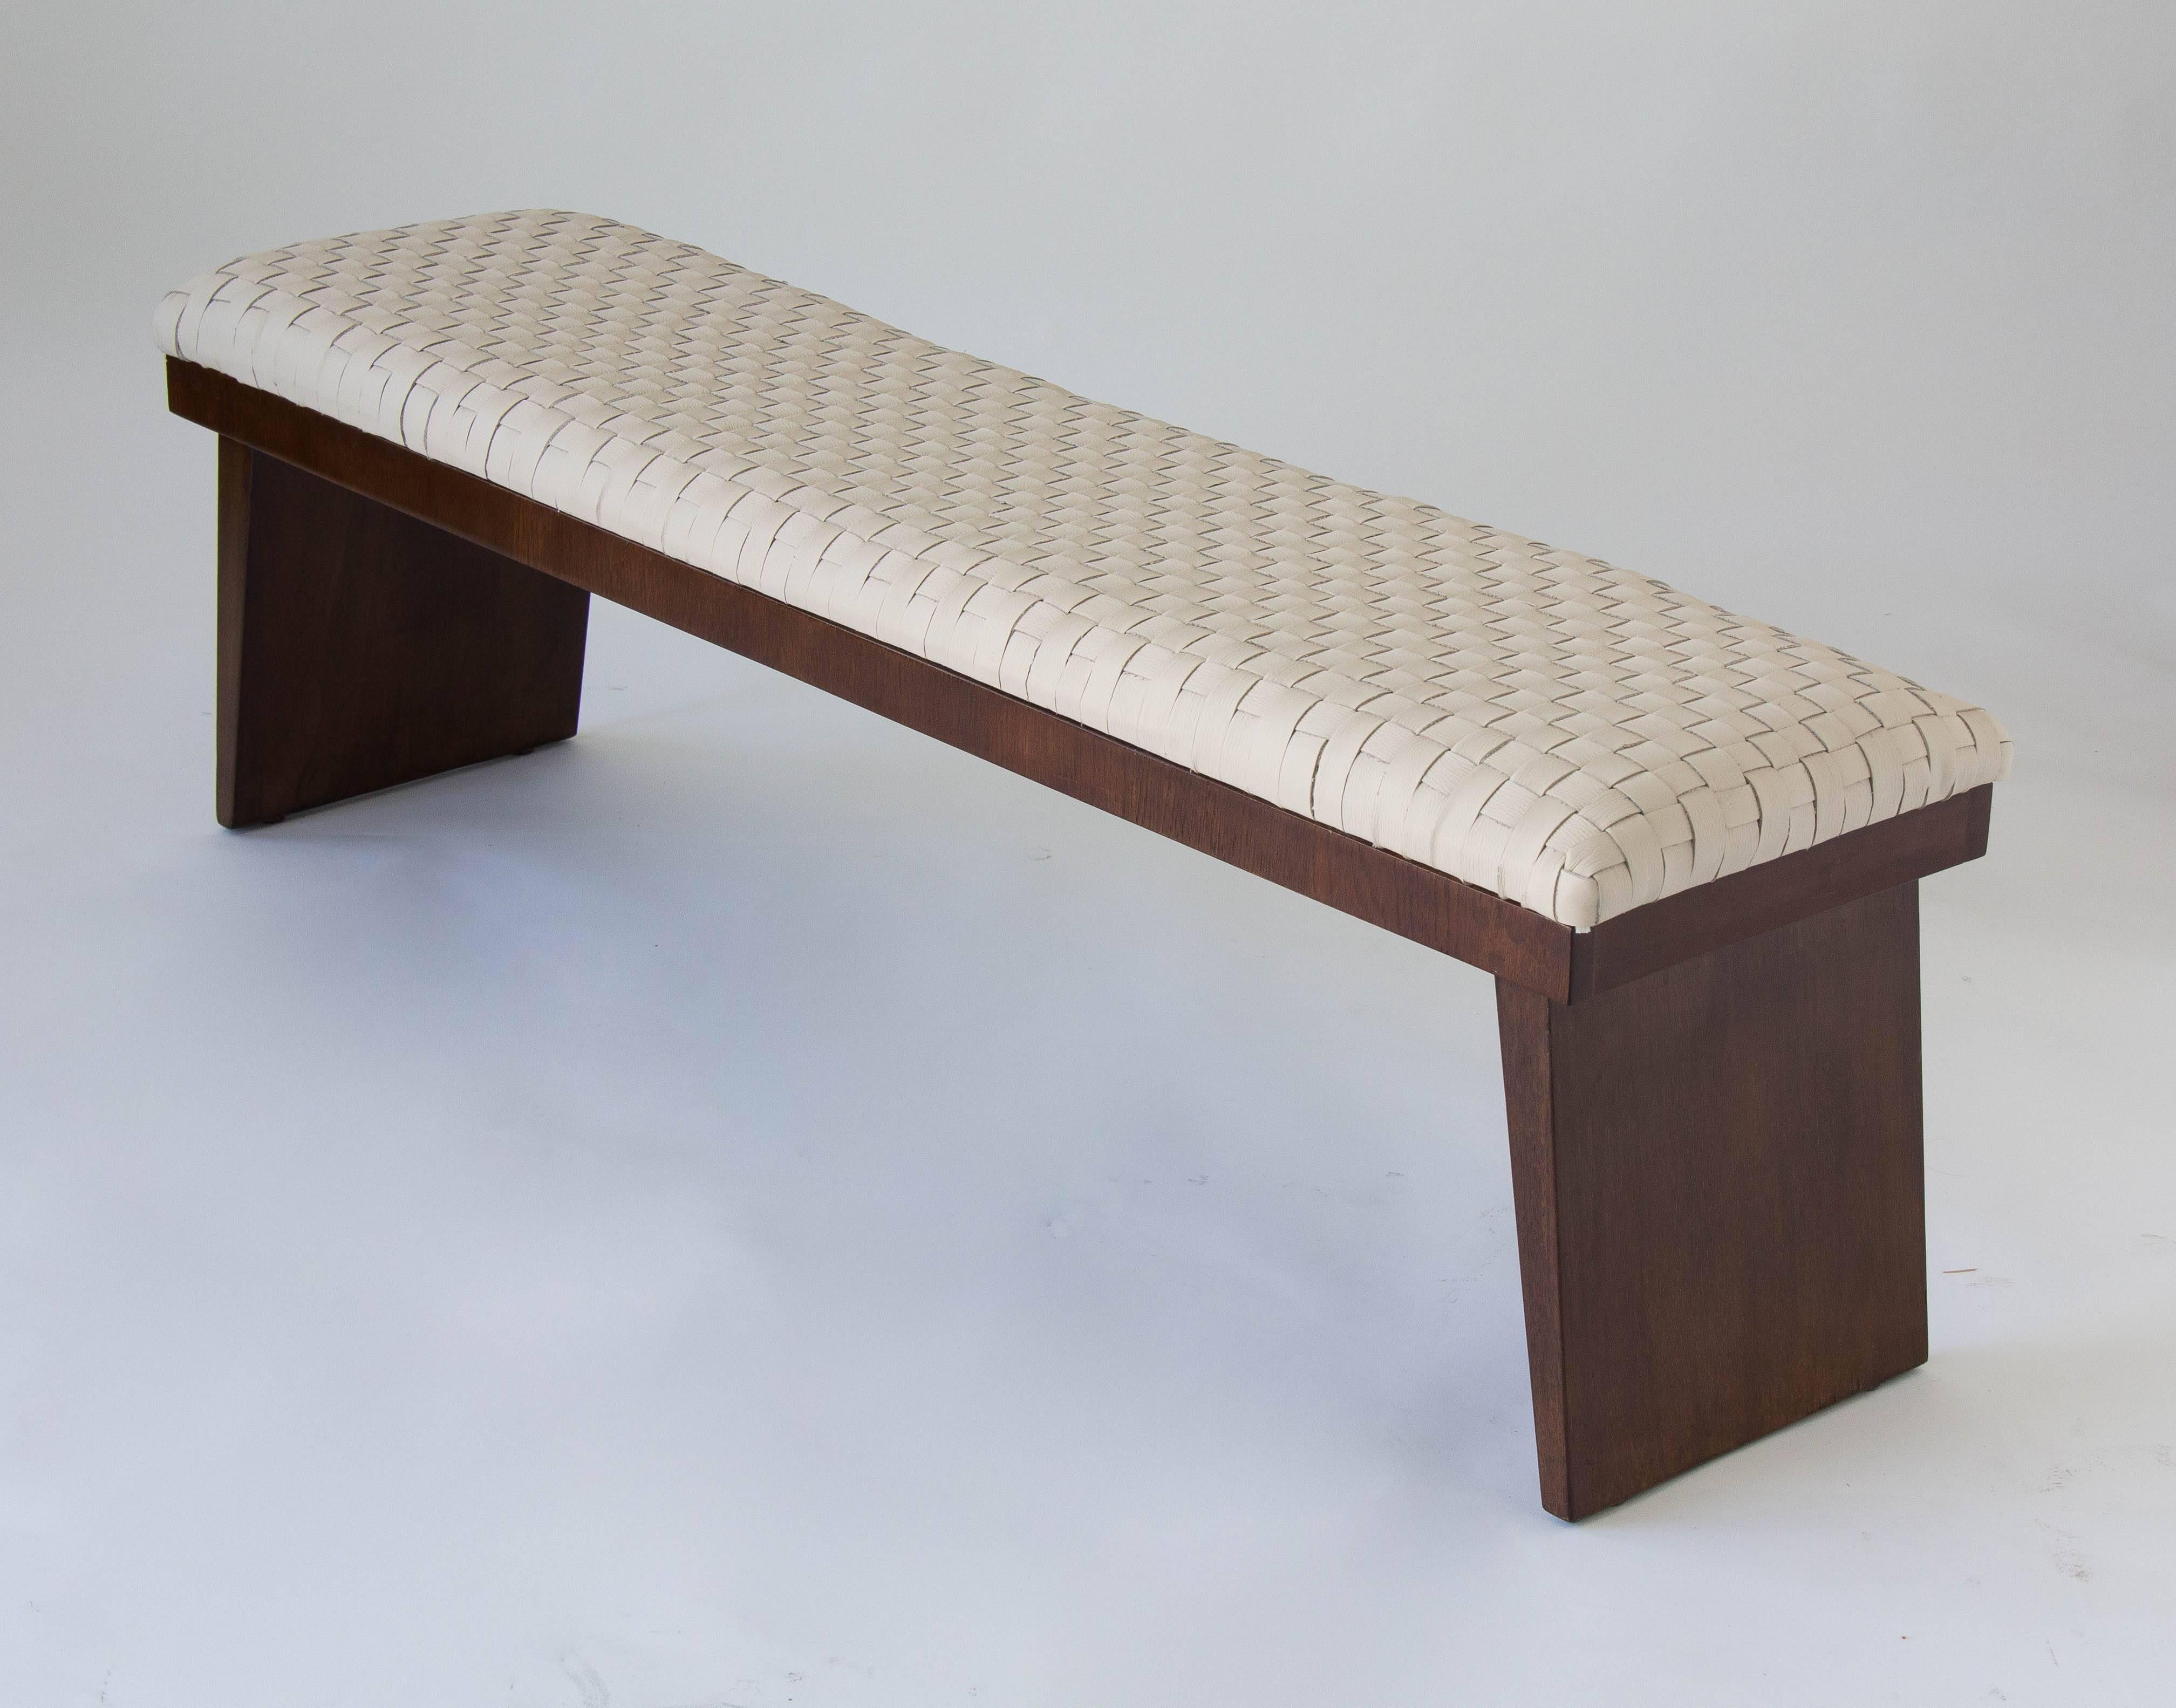 A low bench in walnut wood with two slab legs. The seat is covered in hand-woven top grain leather. 

Condition: Wooden elements have been cleaned and oiled. Foam in the cushion has been replaced. Cushion has been reupholstered in hand-woven